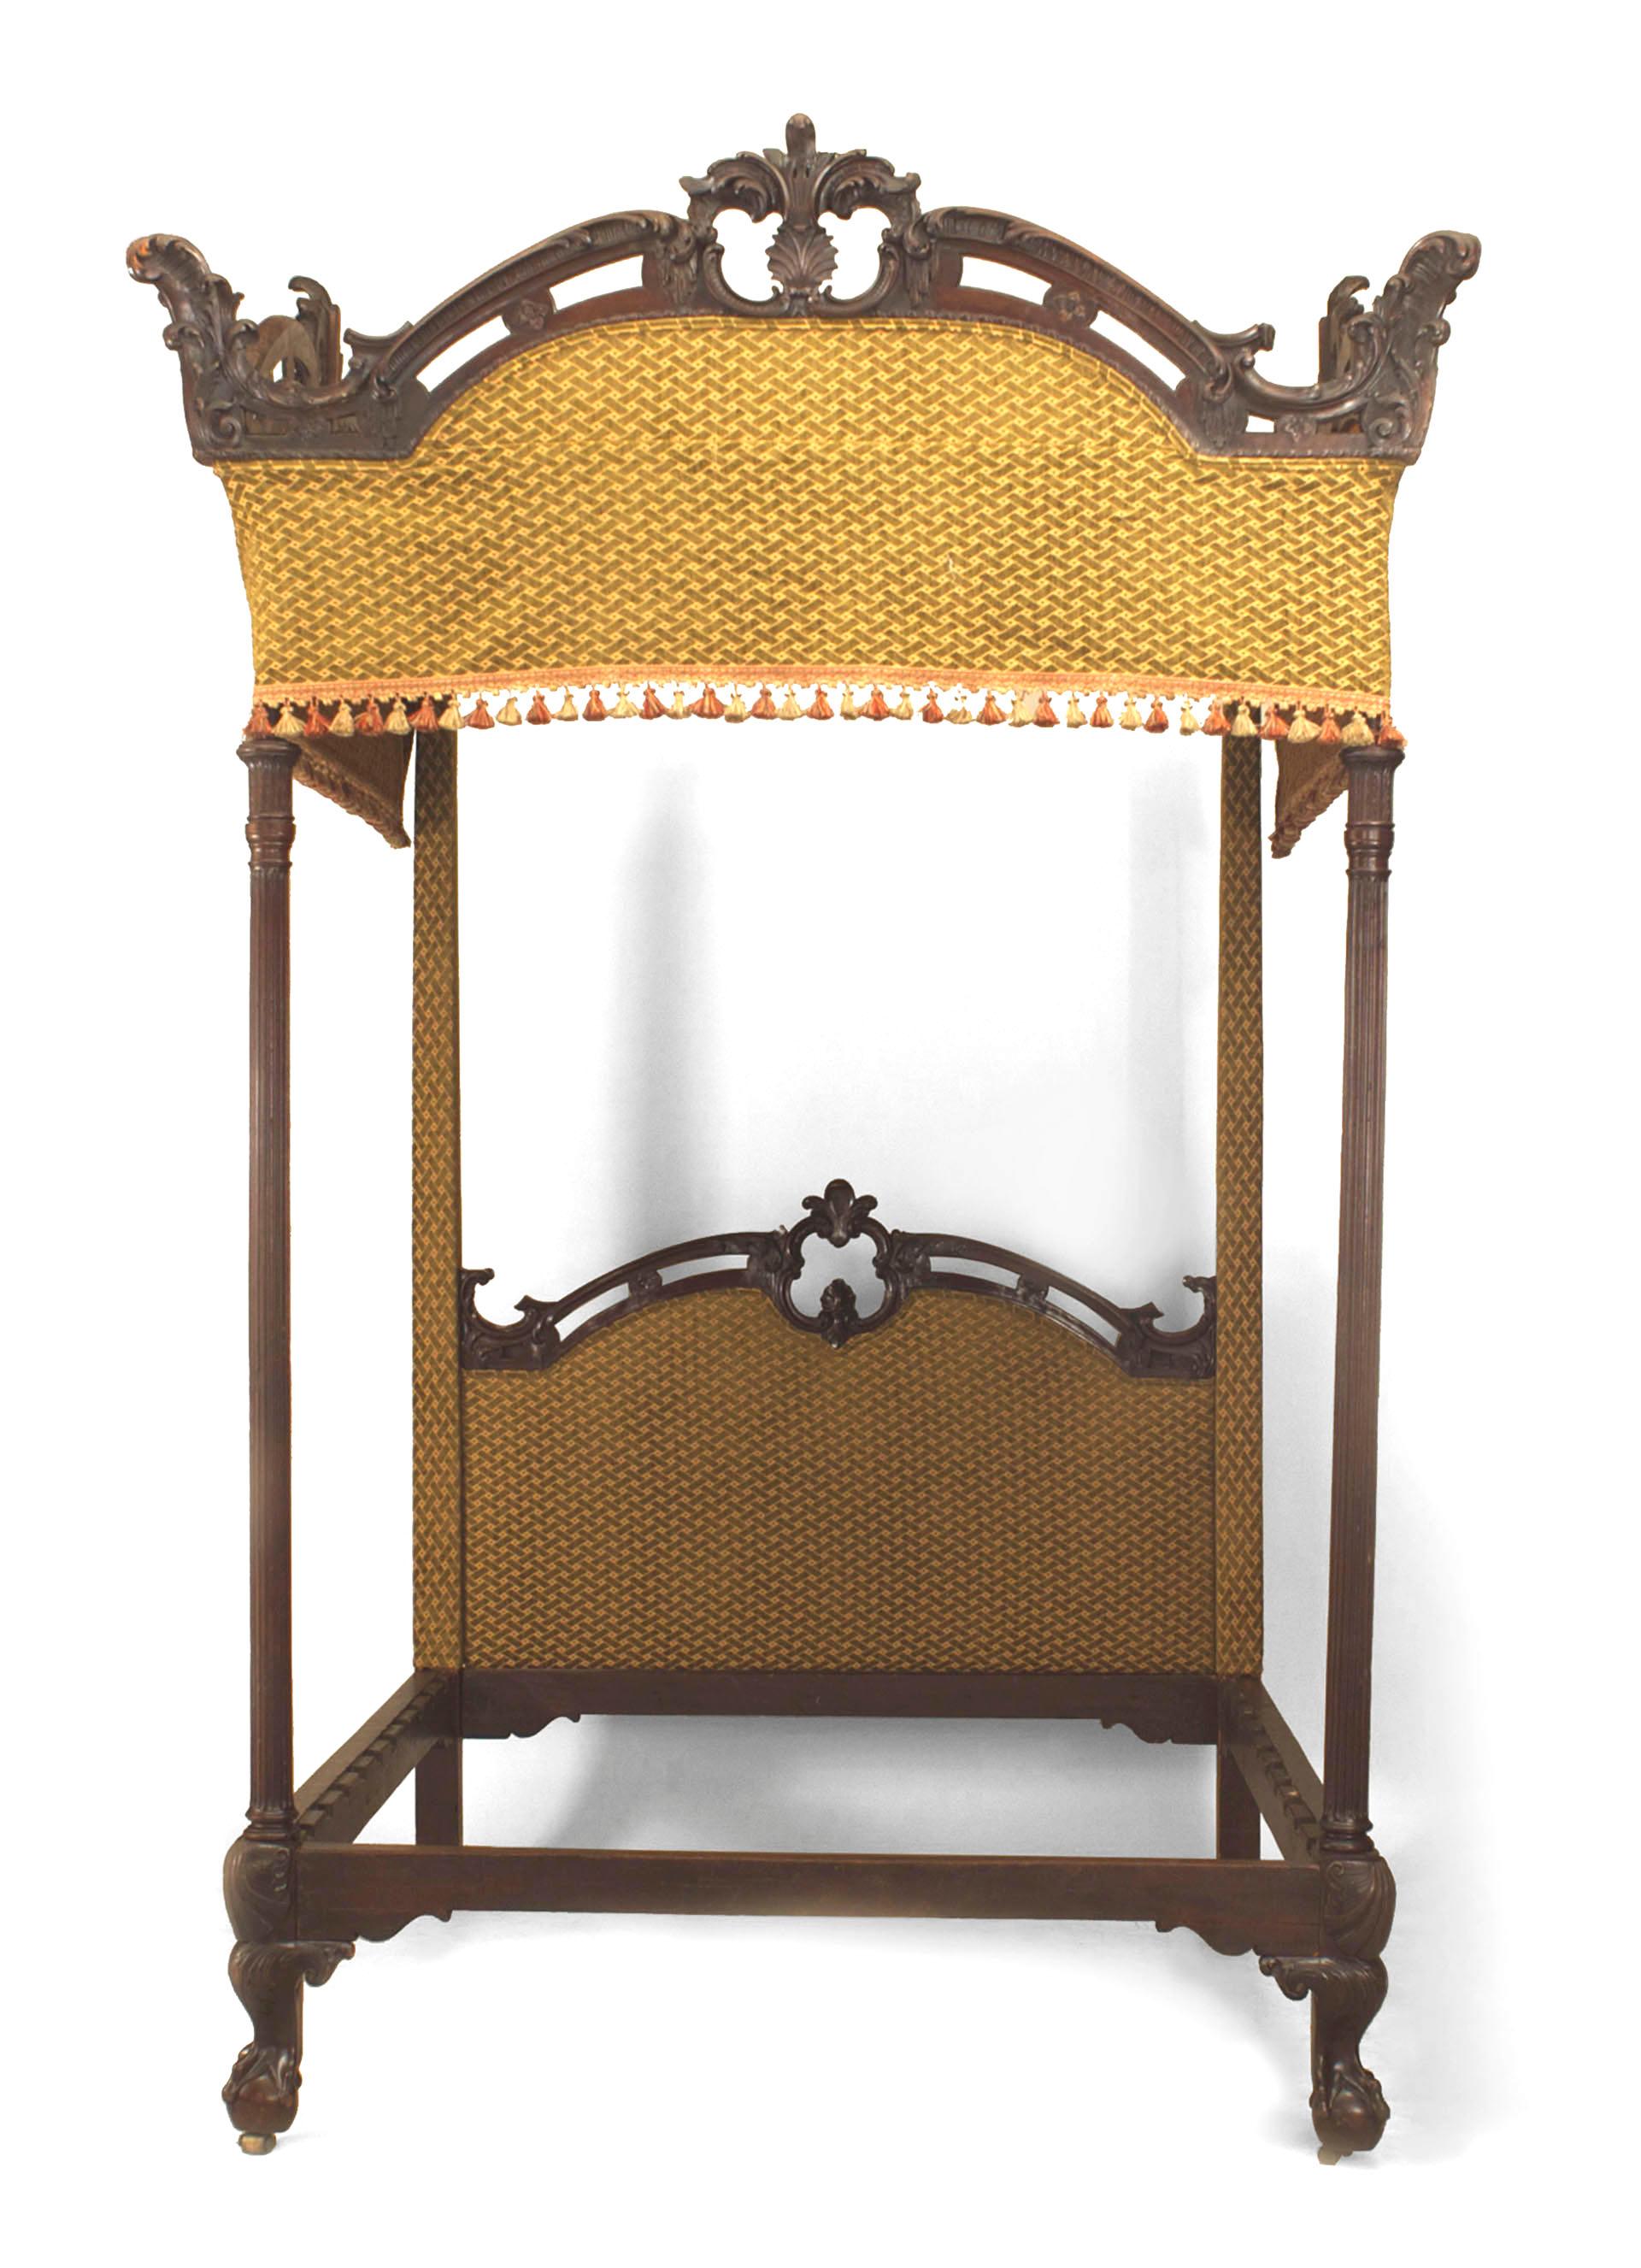 The mahogany bed featuring a pierced carved headboard and canopy supported by four turned and reeded posts all supported by carved ball and claw feet